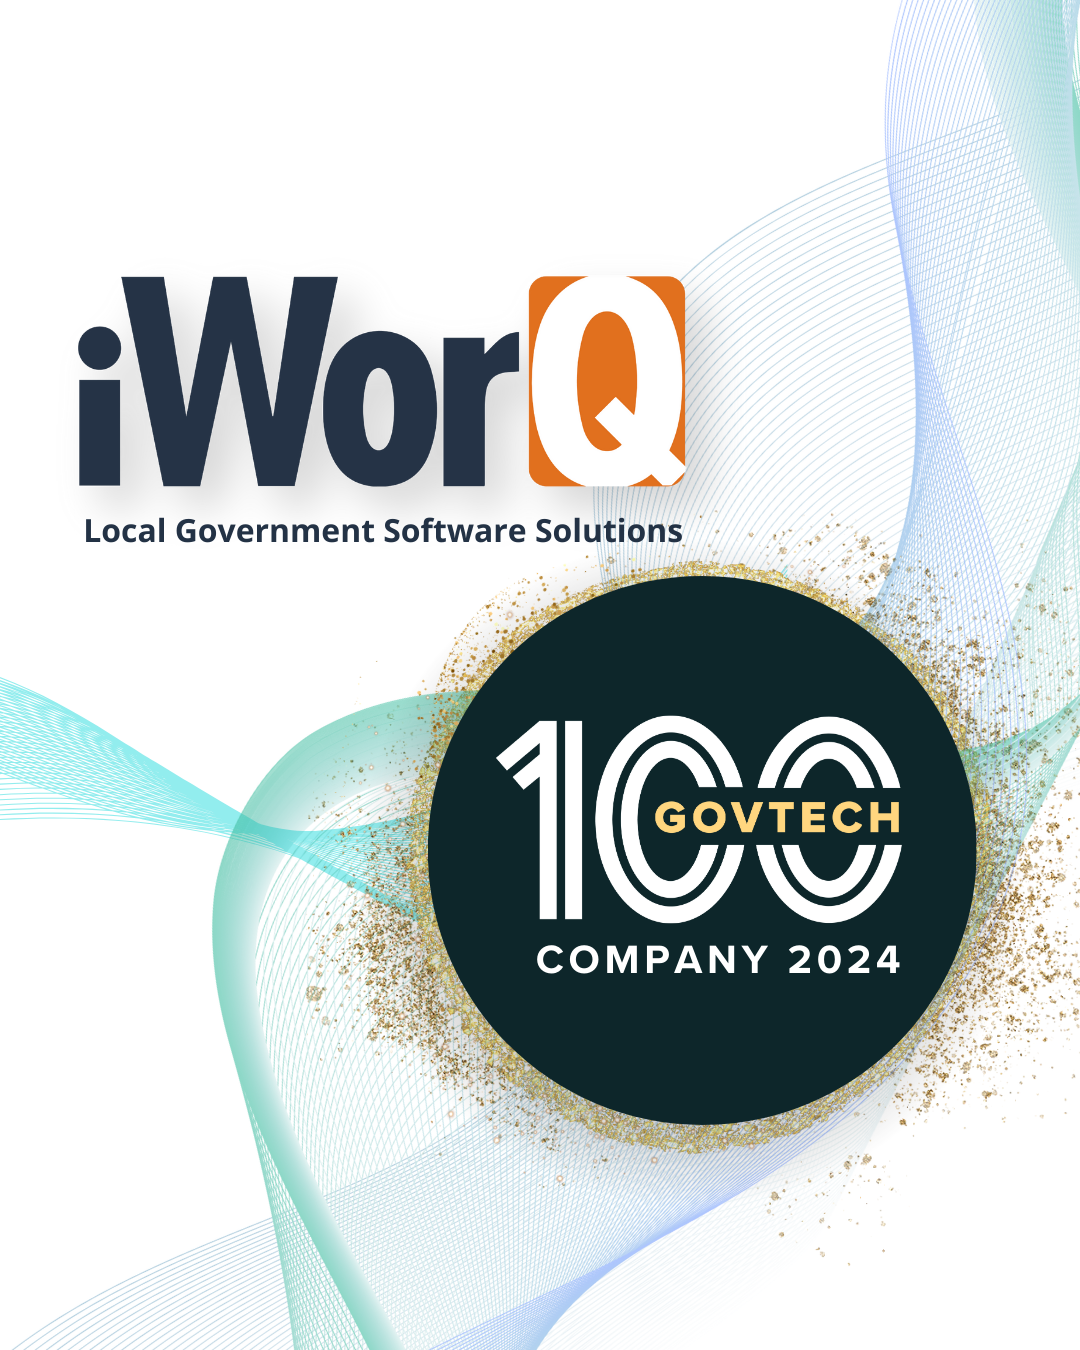 iWorQ Systems awarded as GovTech 100 Company in 2024